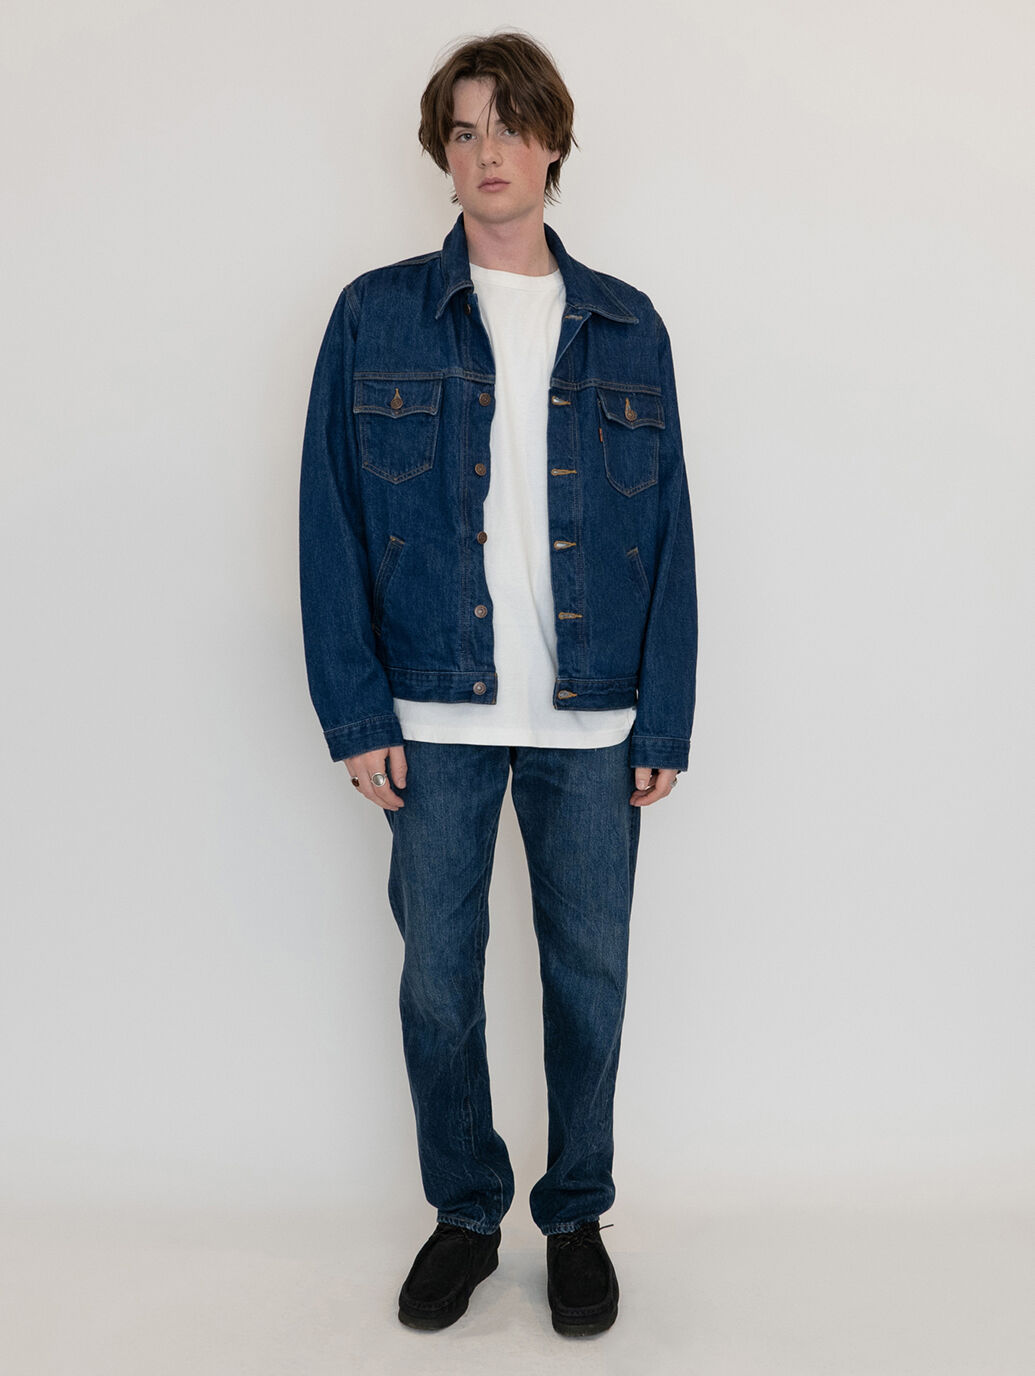 LEVI'S® VINTAGE CLOTHINGモデル ® JEANS Camp New Beginning